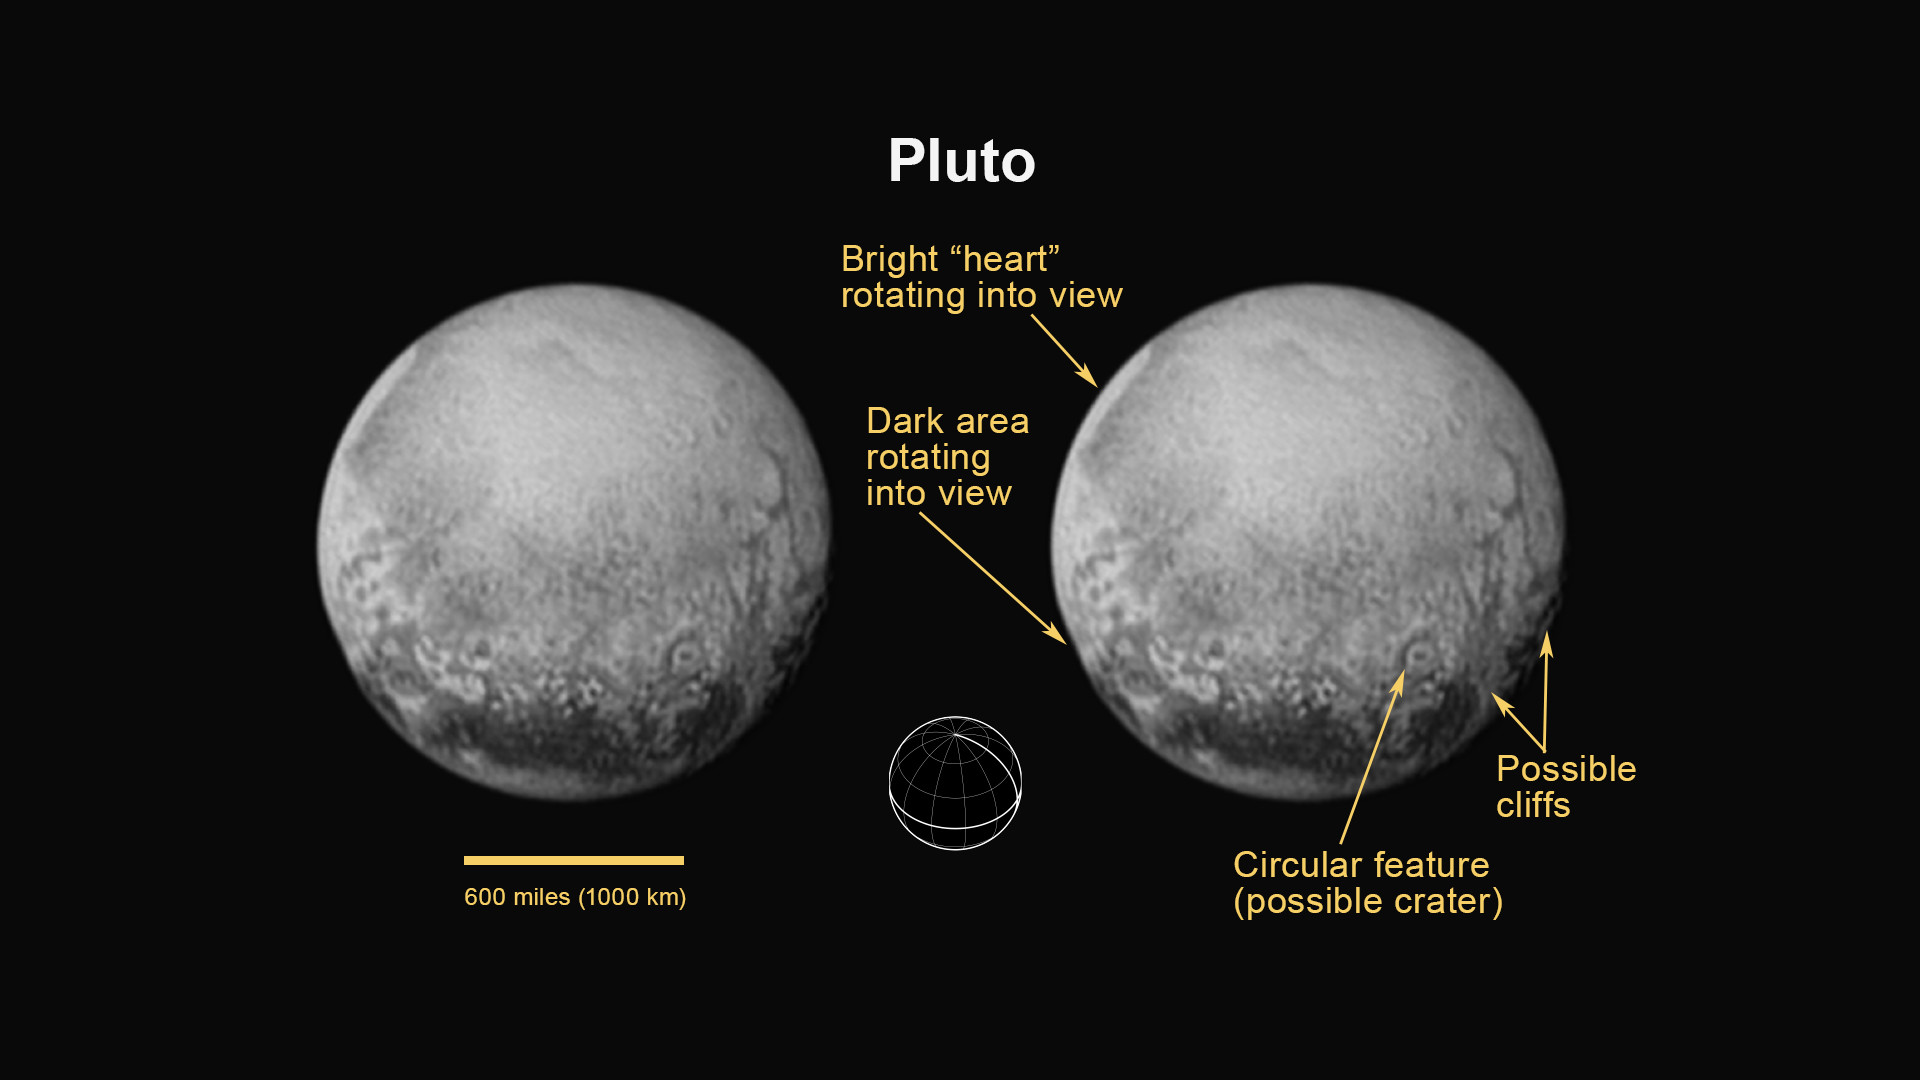 1920x1080 Pluto annotated